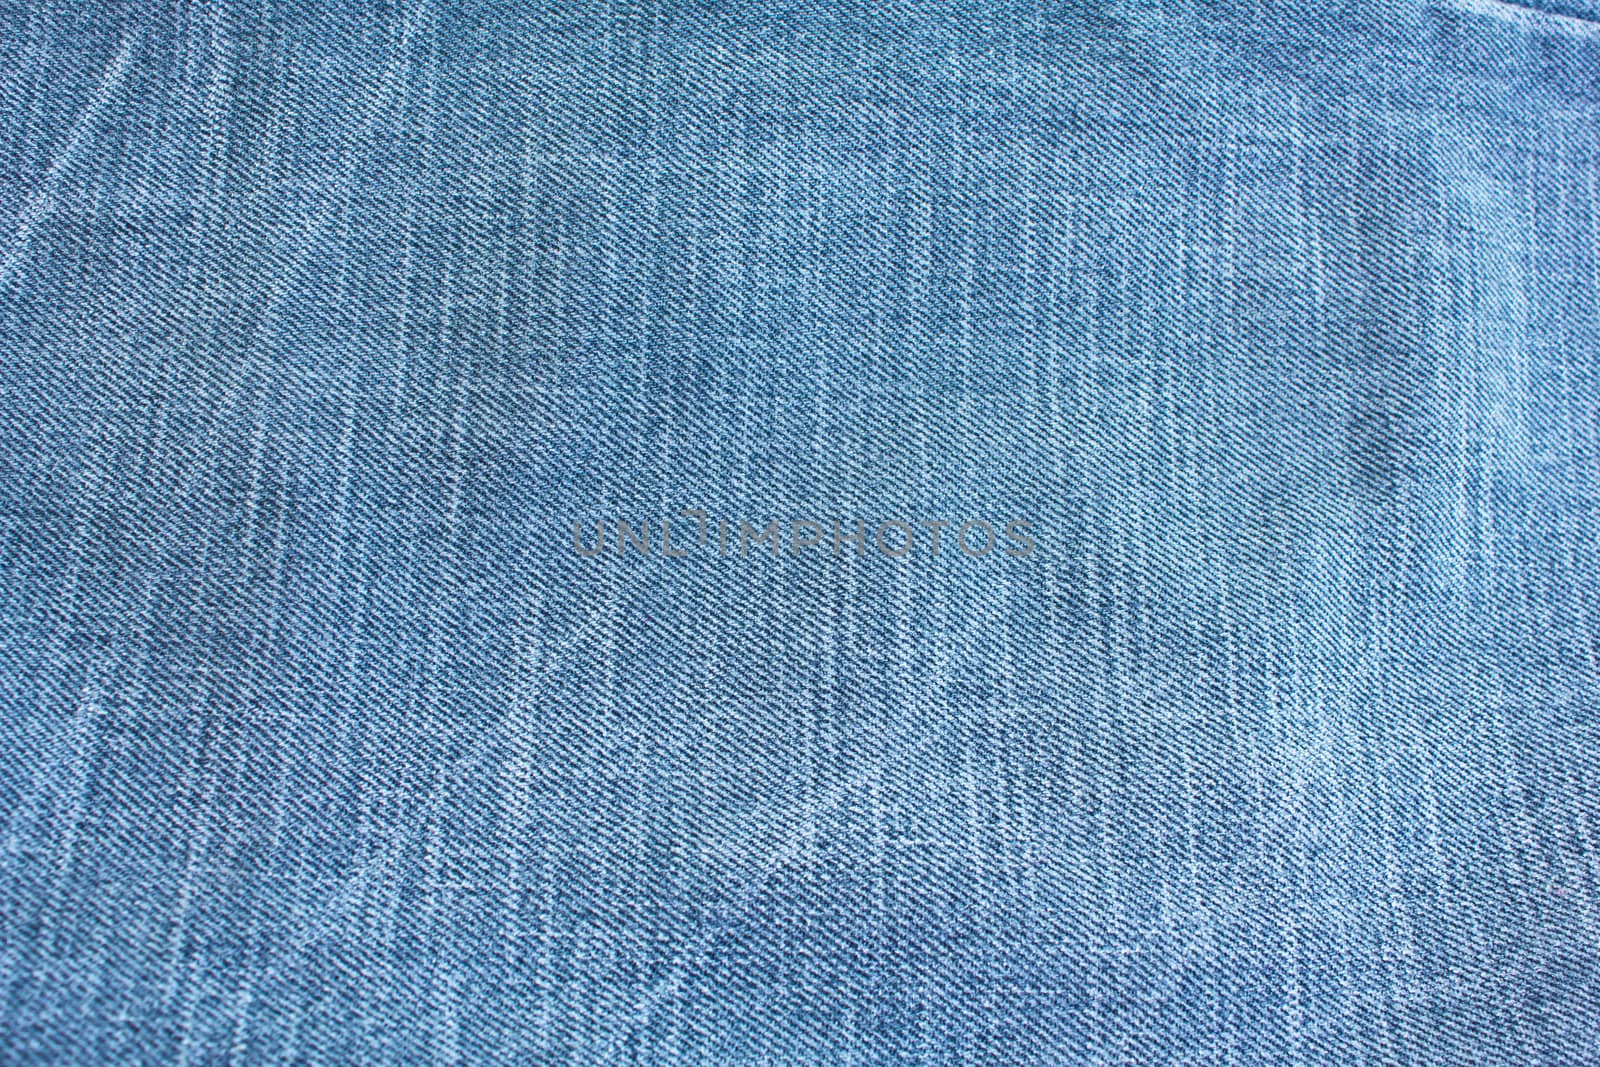 Stock Photo - blue jean cloth texture background